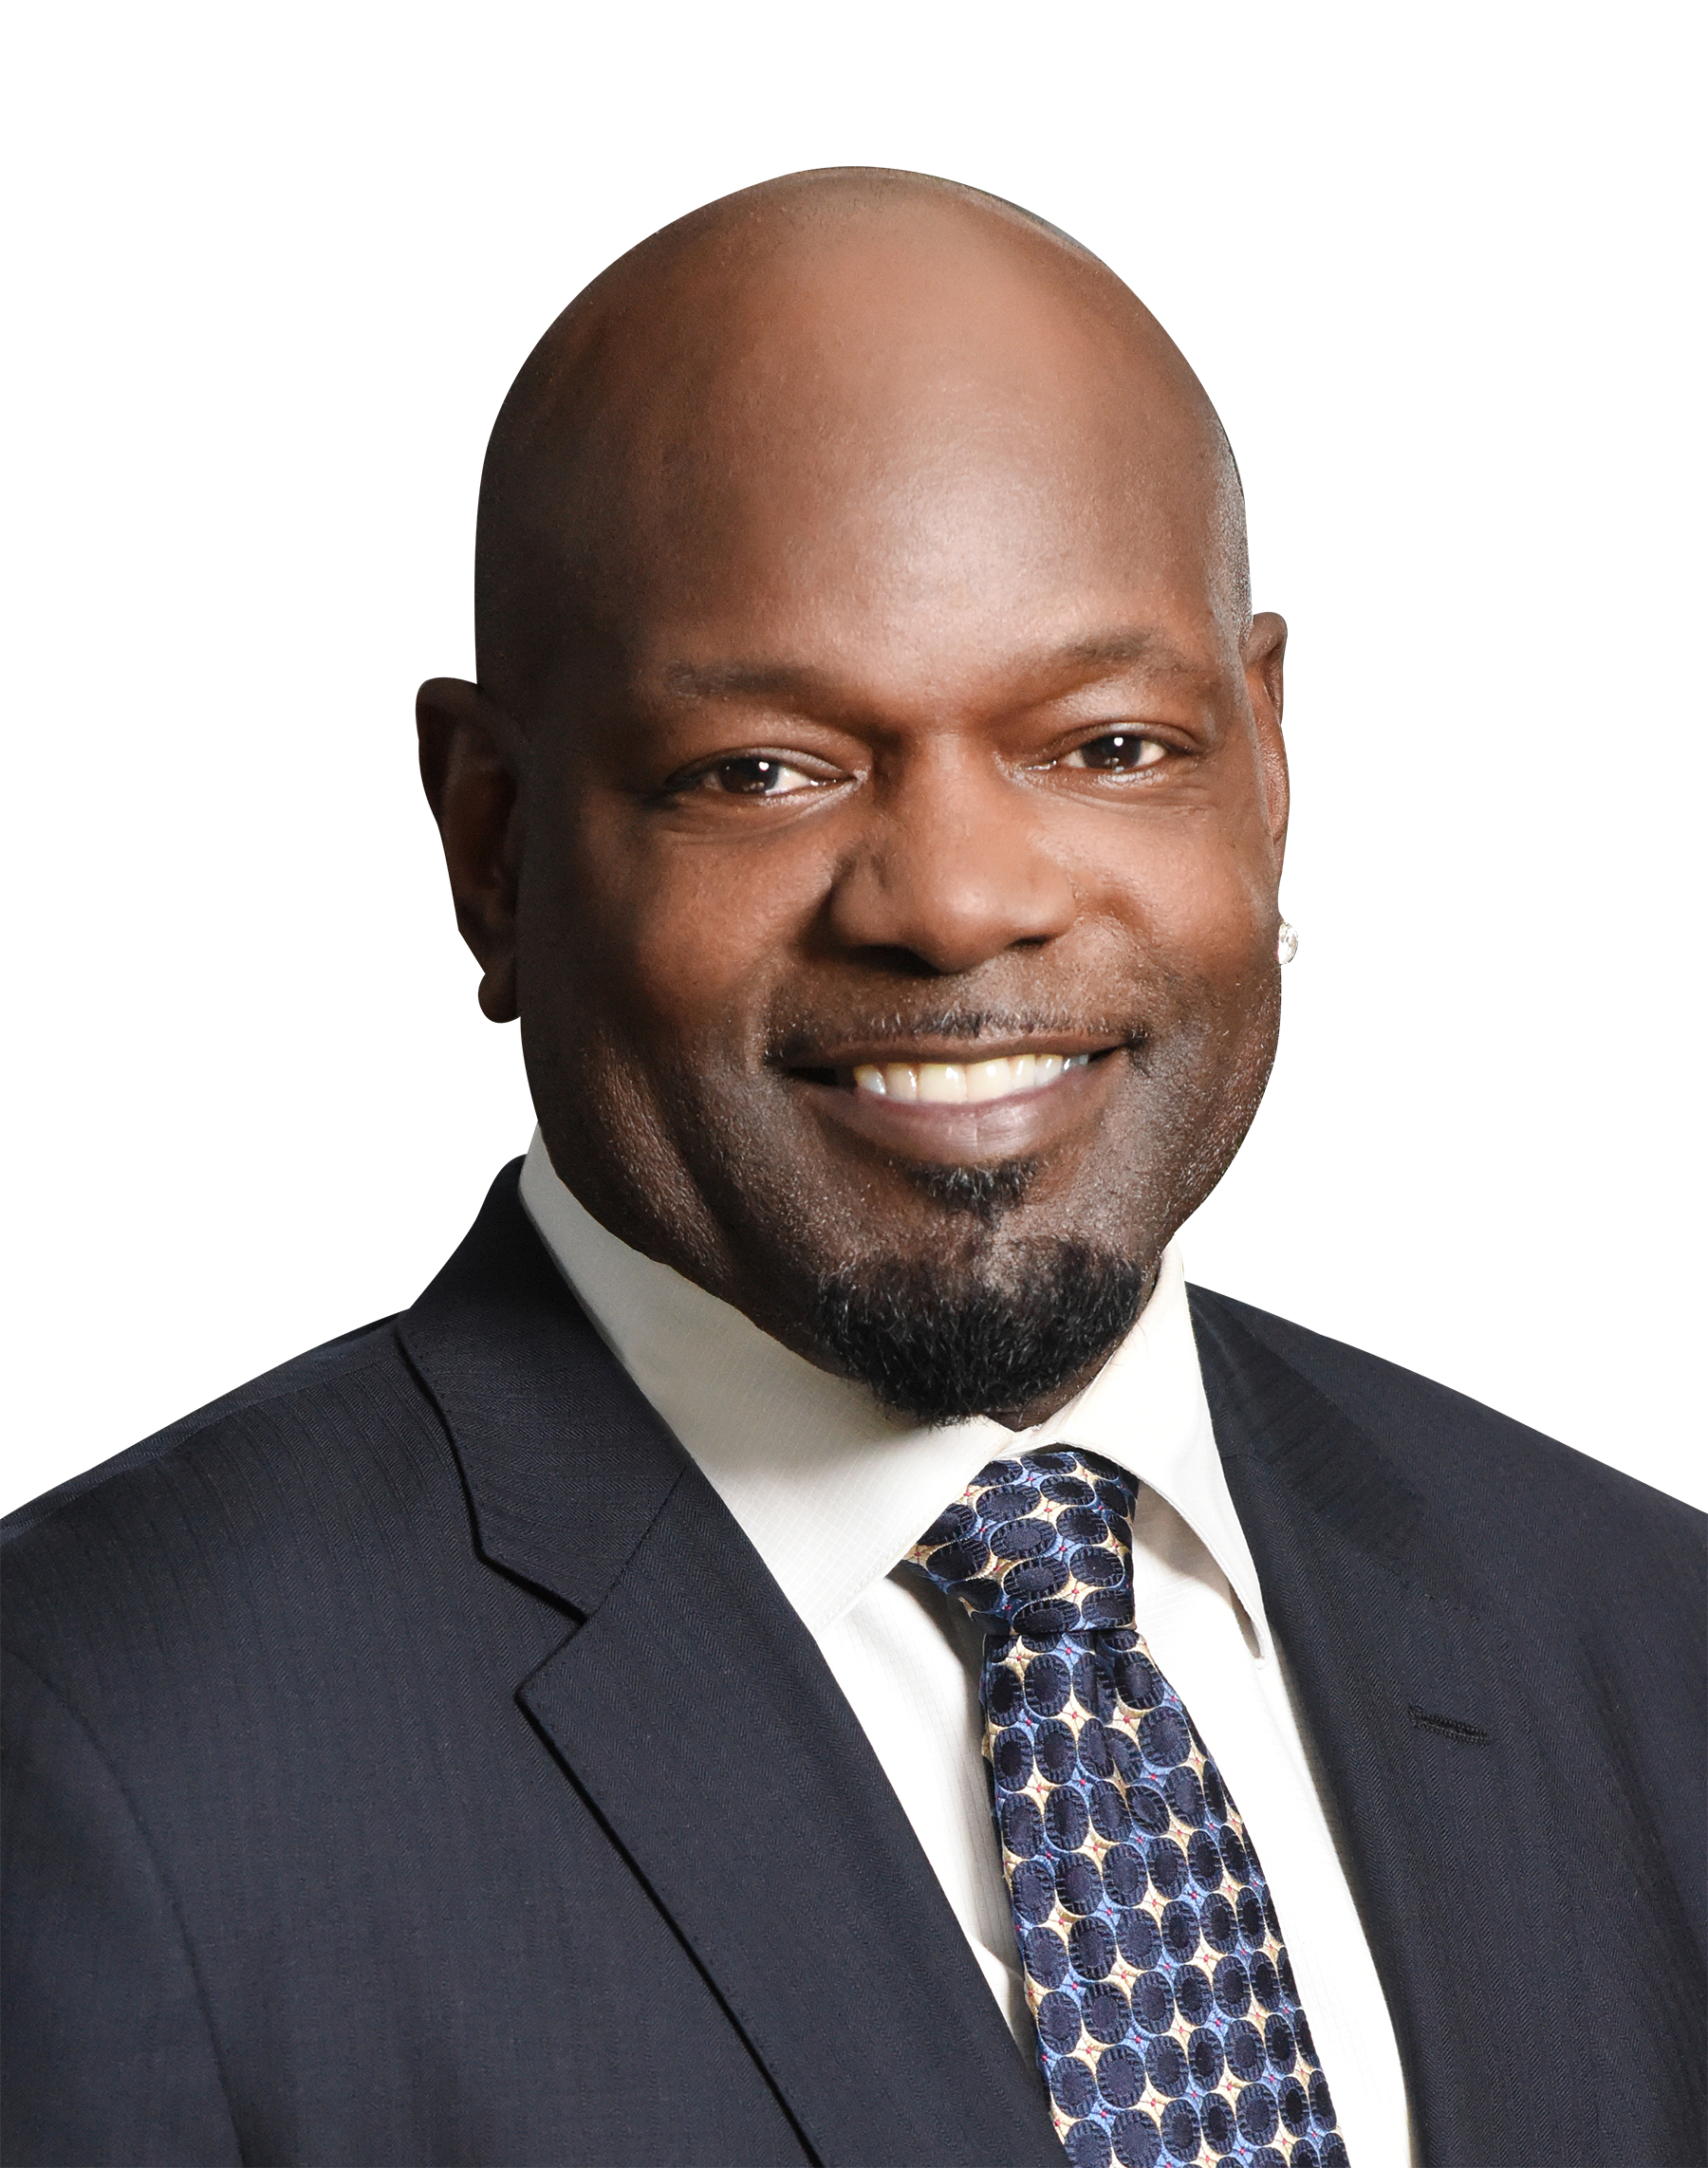 Emmitt Smith will be the keynote speaker at the Productive Dentist Academy Conference in September. | Image Credit: © Productive Dentist Academy 